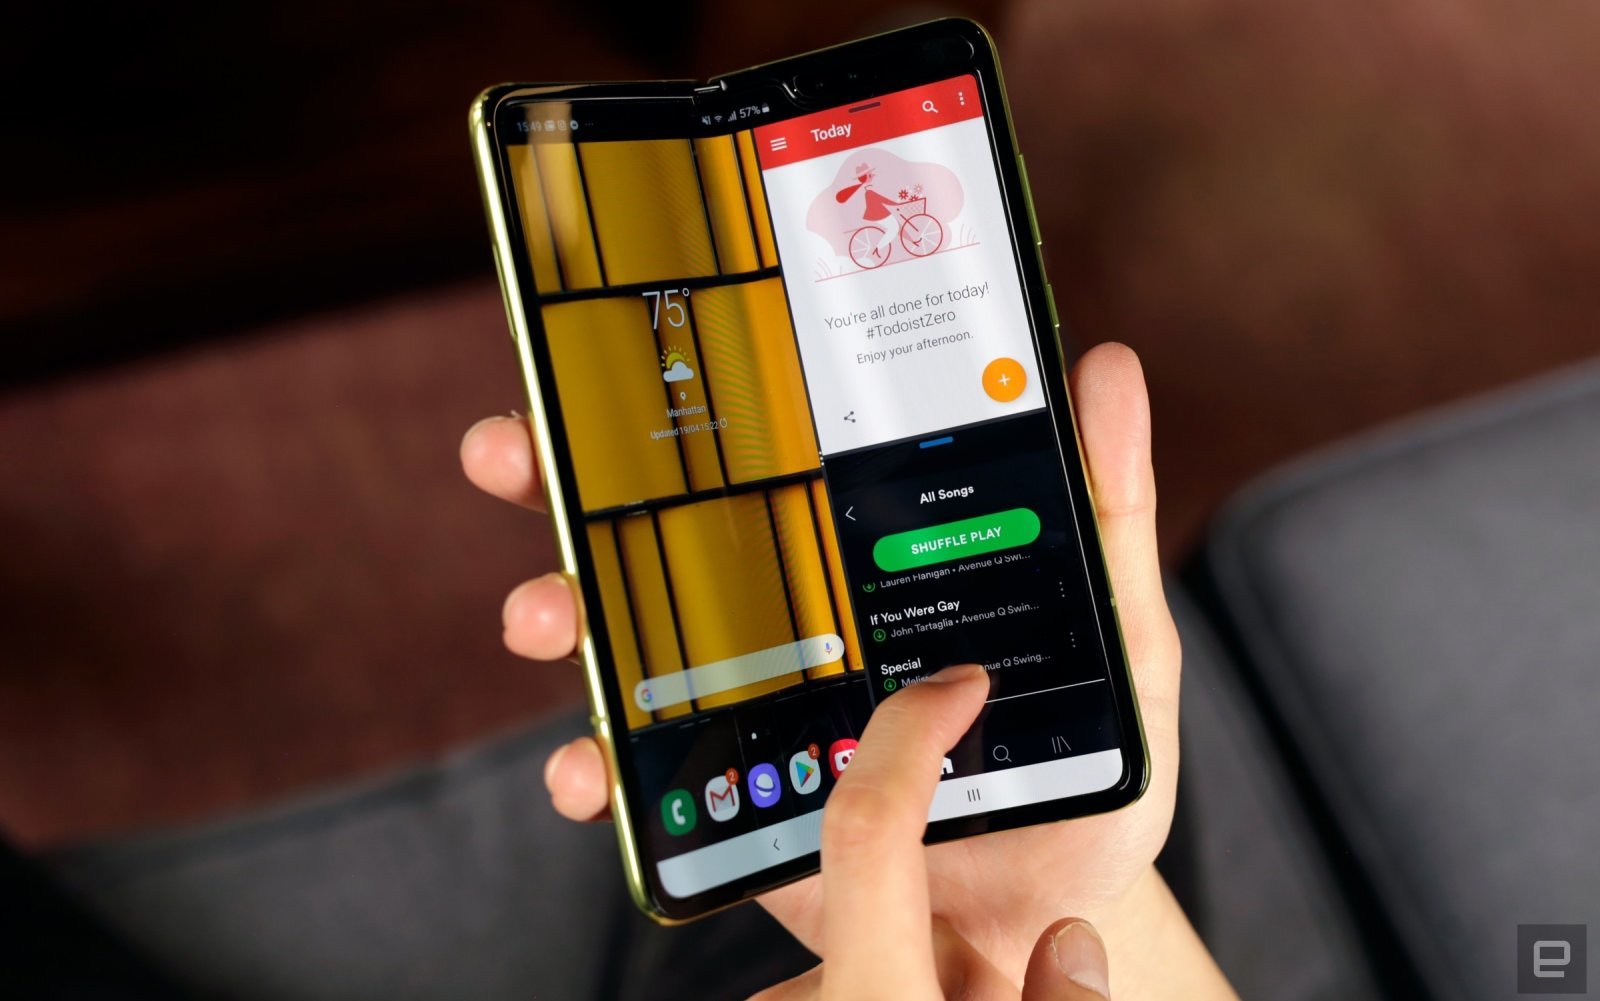 AT&T has cancelled all the pre-order of Galaxy Fold and they have issued $100 million Promo cards